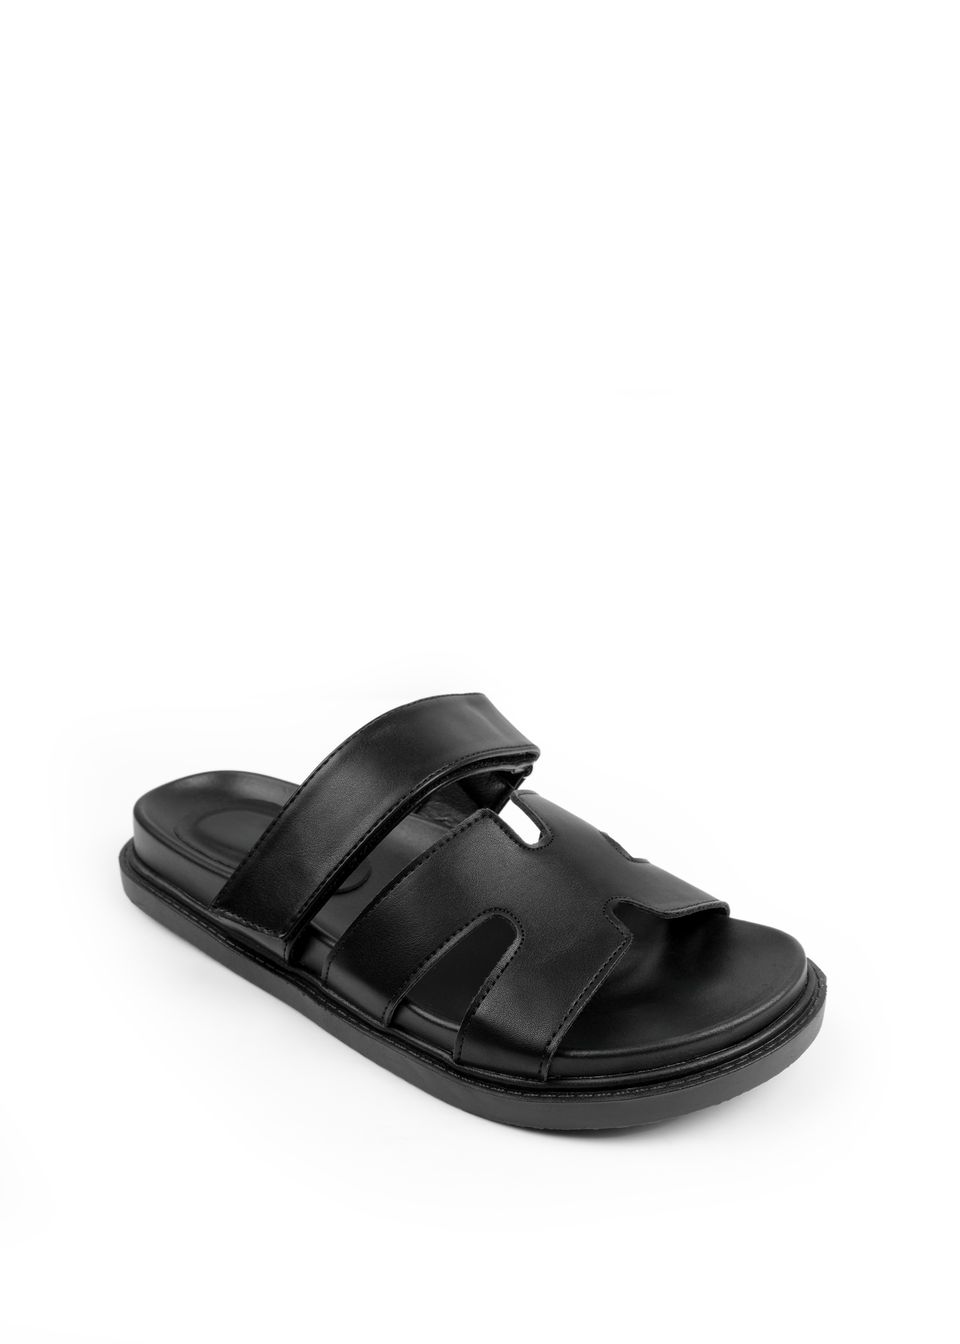 Where's That From Black Pu Adagio Strappy Sandals - Size 7 | Matalan (UK)